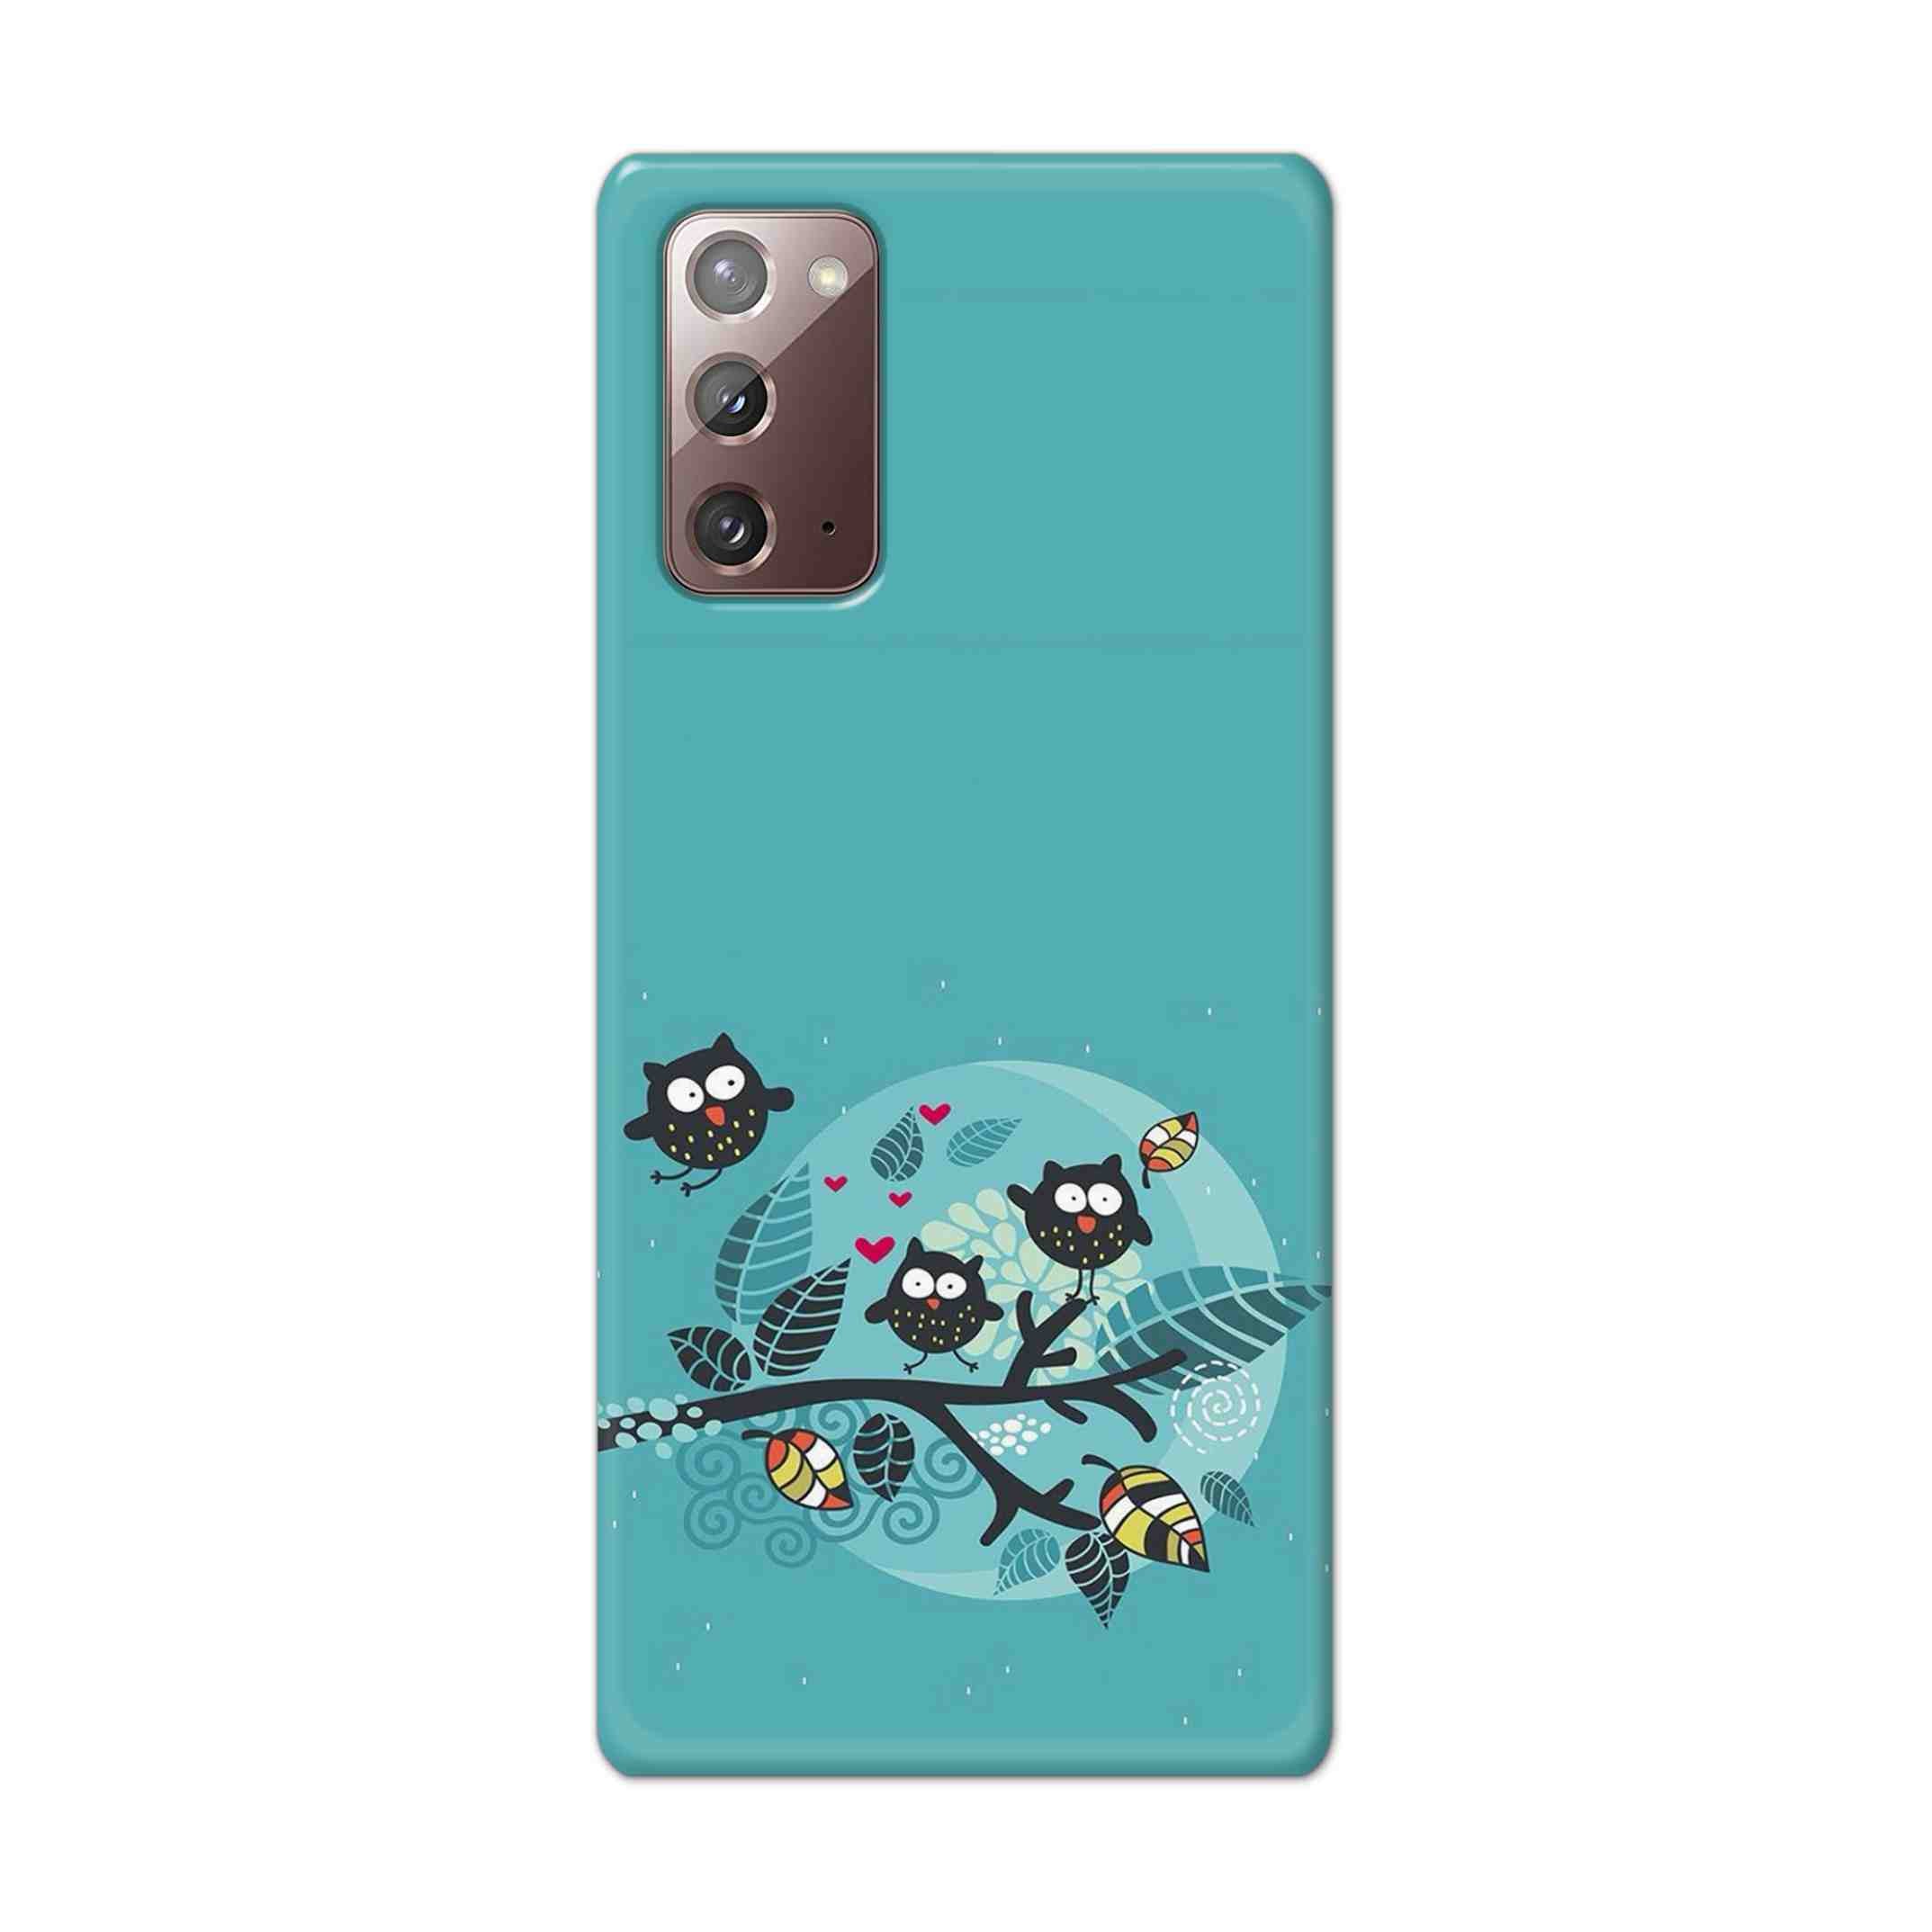 Buy Owl Hard Back Mobile Phone Case Cover For Samsung Galaxy Note 20 Online